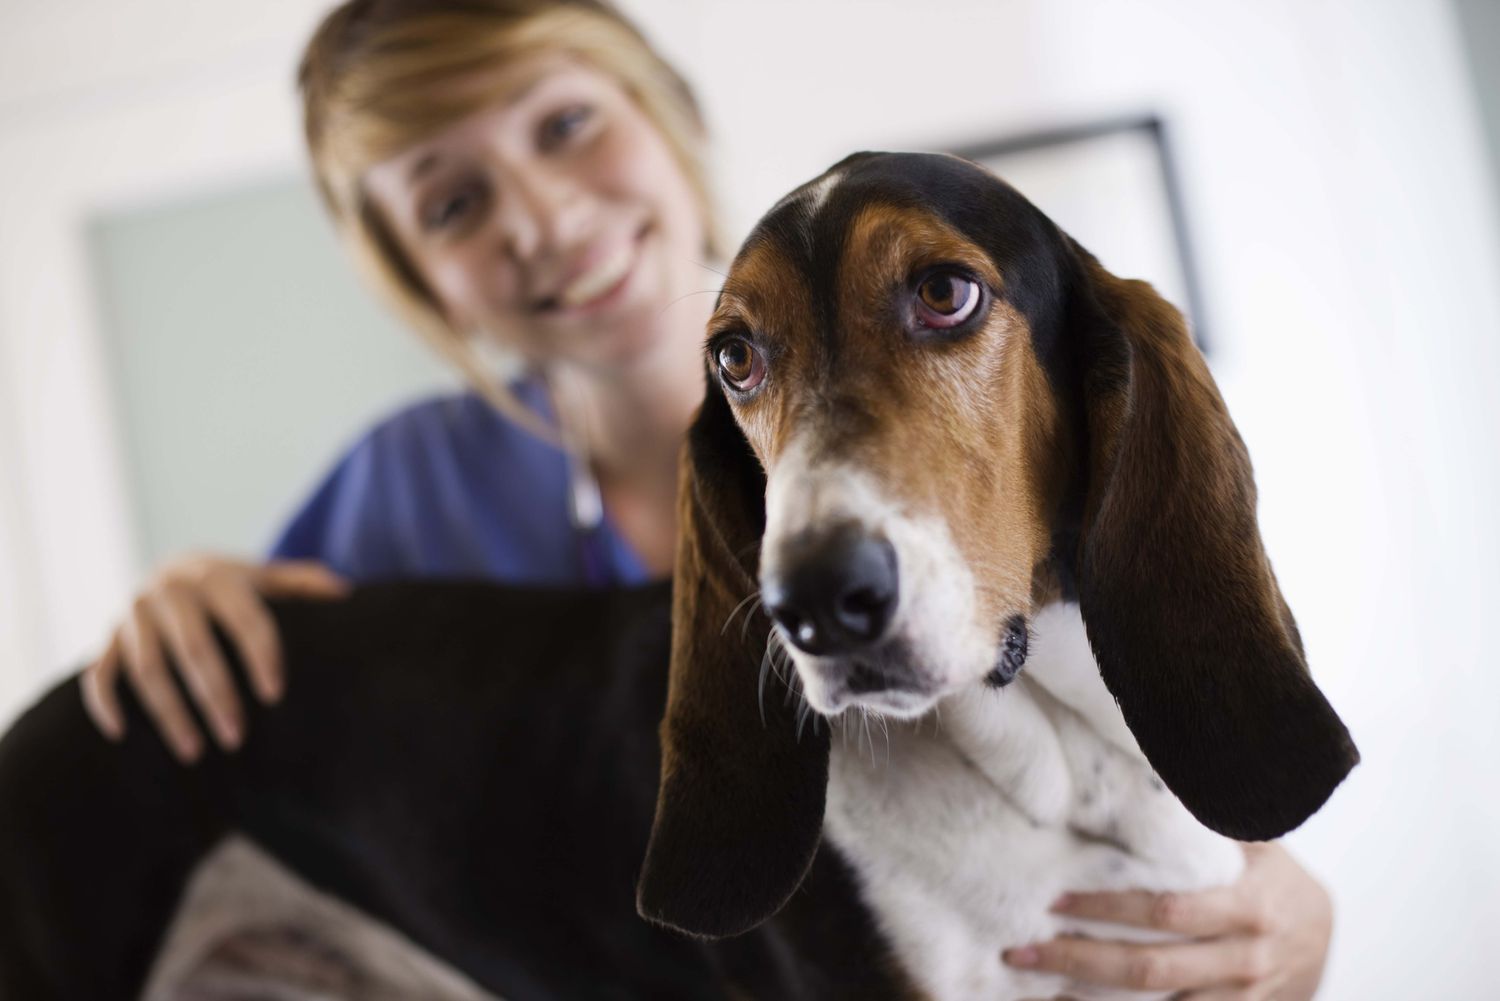 What is the most common health problem in dogs?